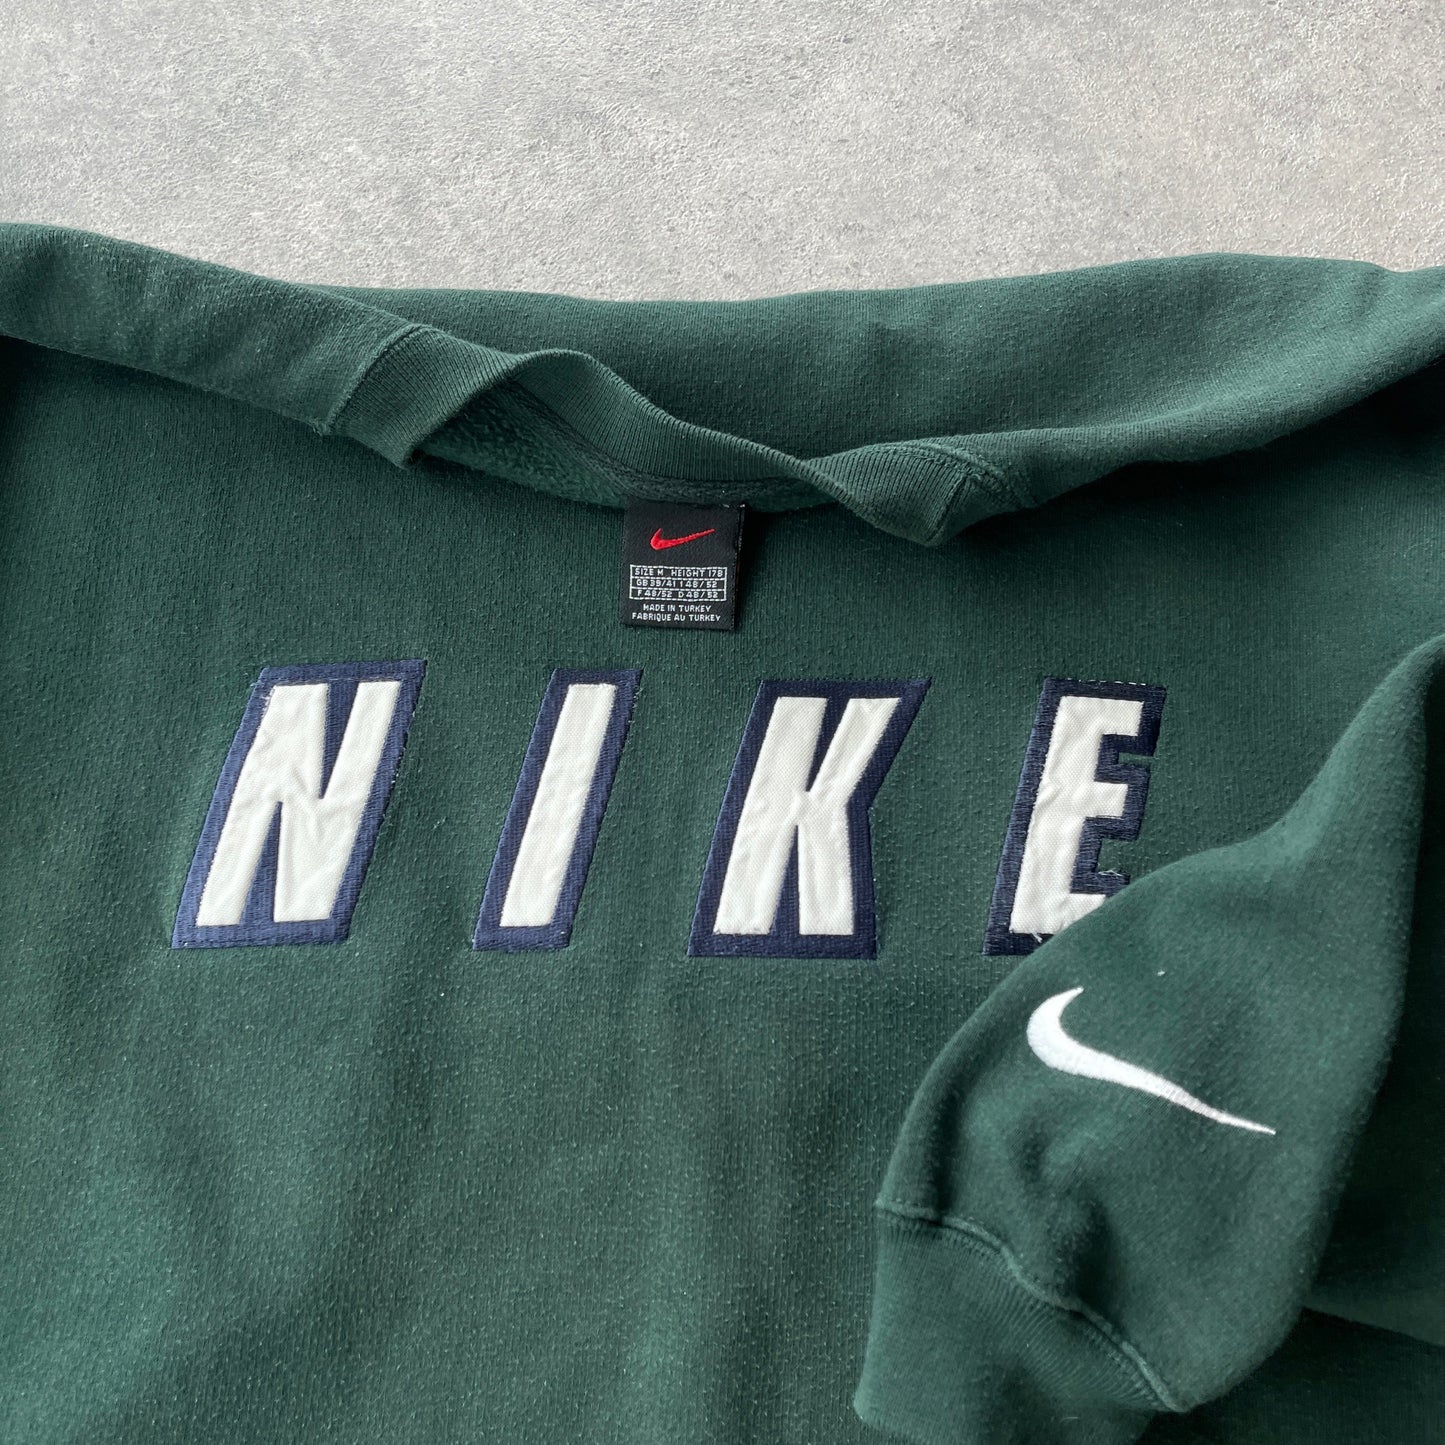 Nike RARE 1990s heavyweight embroidered spellout sweatshirt (M)